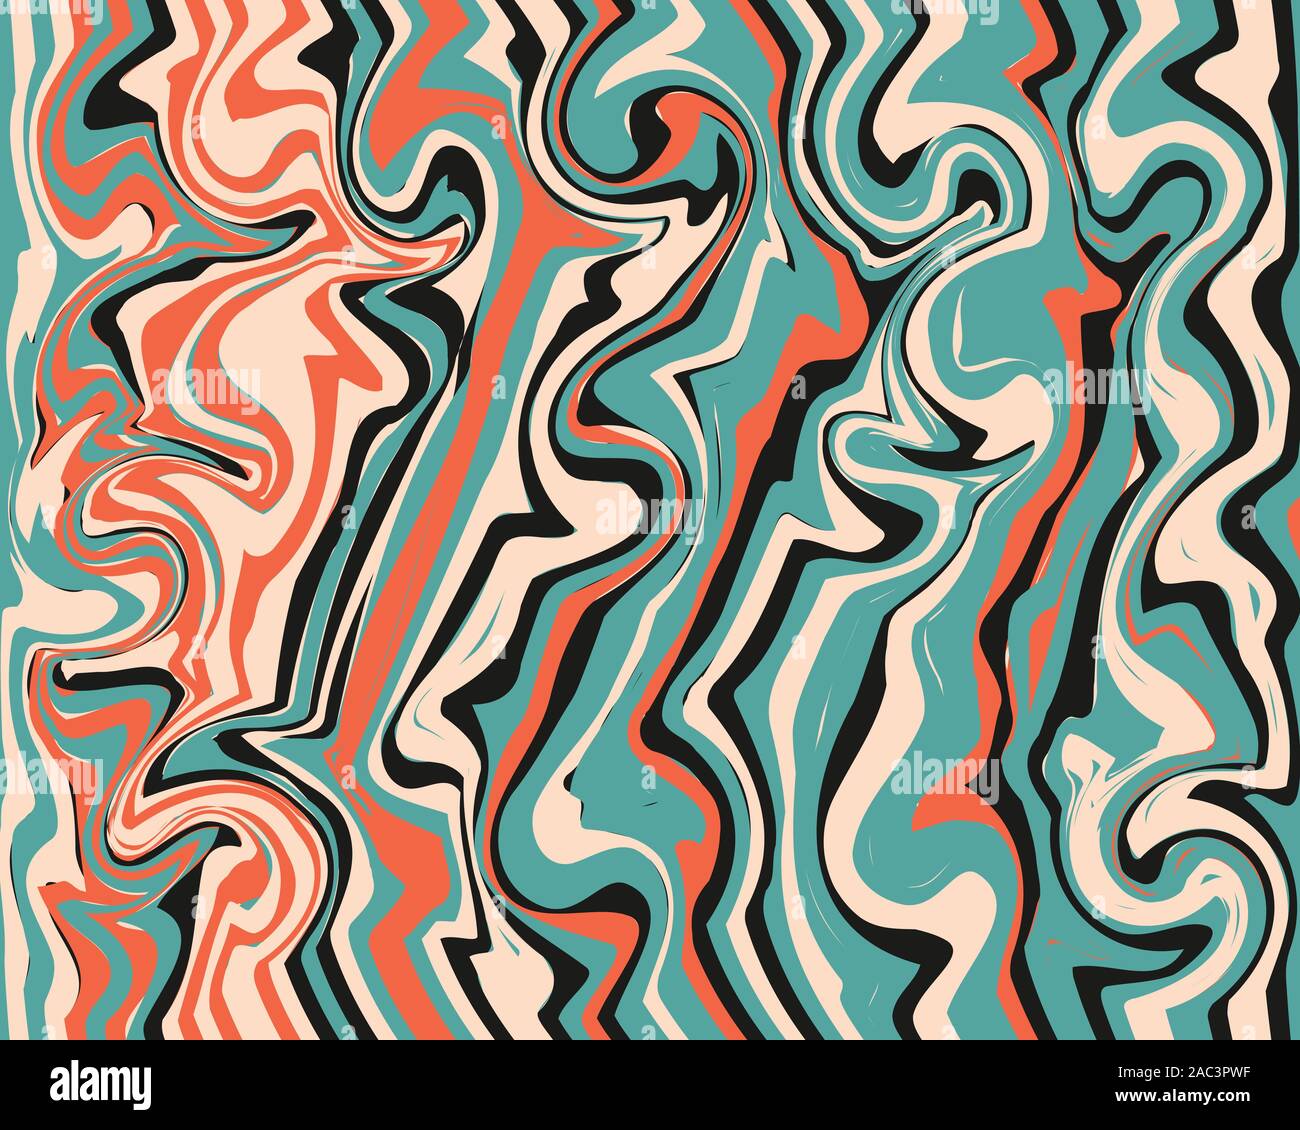 Seamless abstract marble pattern. Hand drawn vector background. Trendy textile, fabric, wrapping Stock Photo